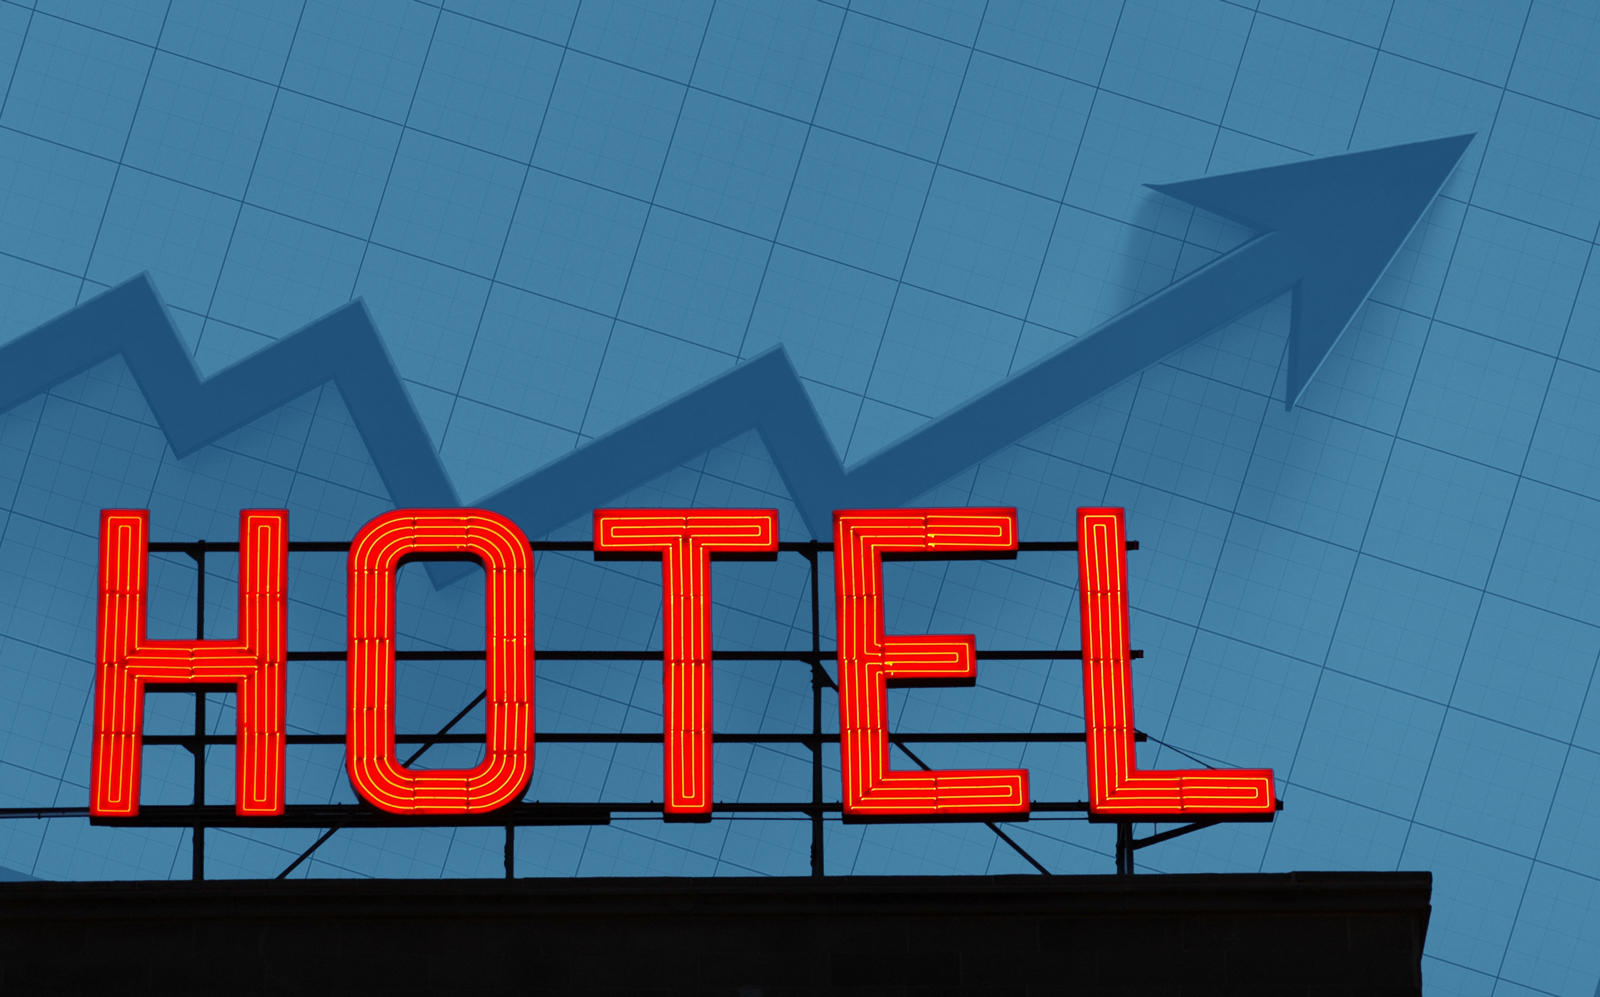 Demand for hotel rooms continued to rise in many markets across the country last week. The civil unrest of the last two weeks may have dampened demand in some cities. (iStock)